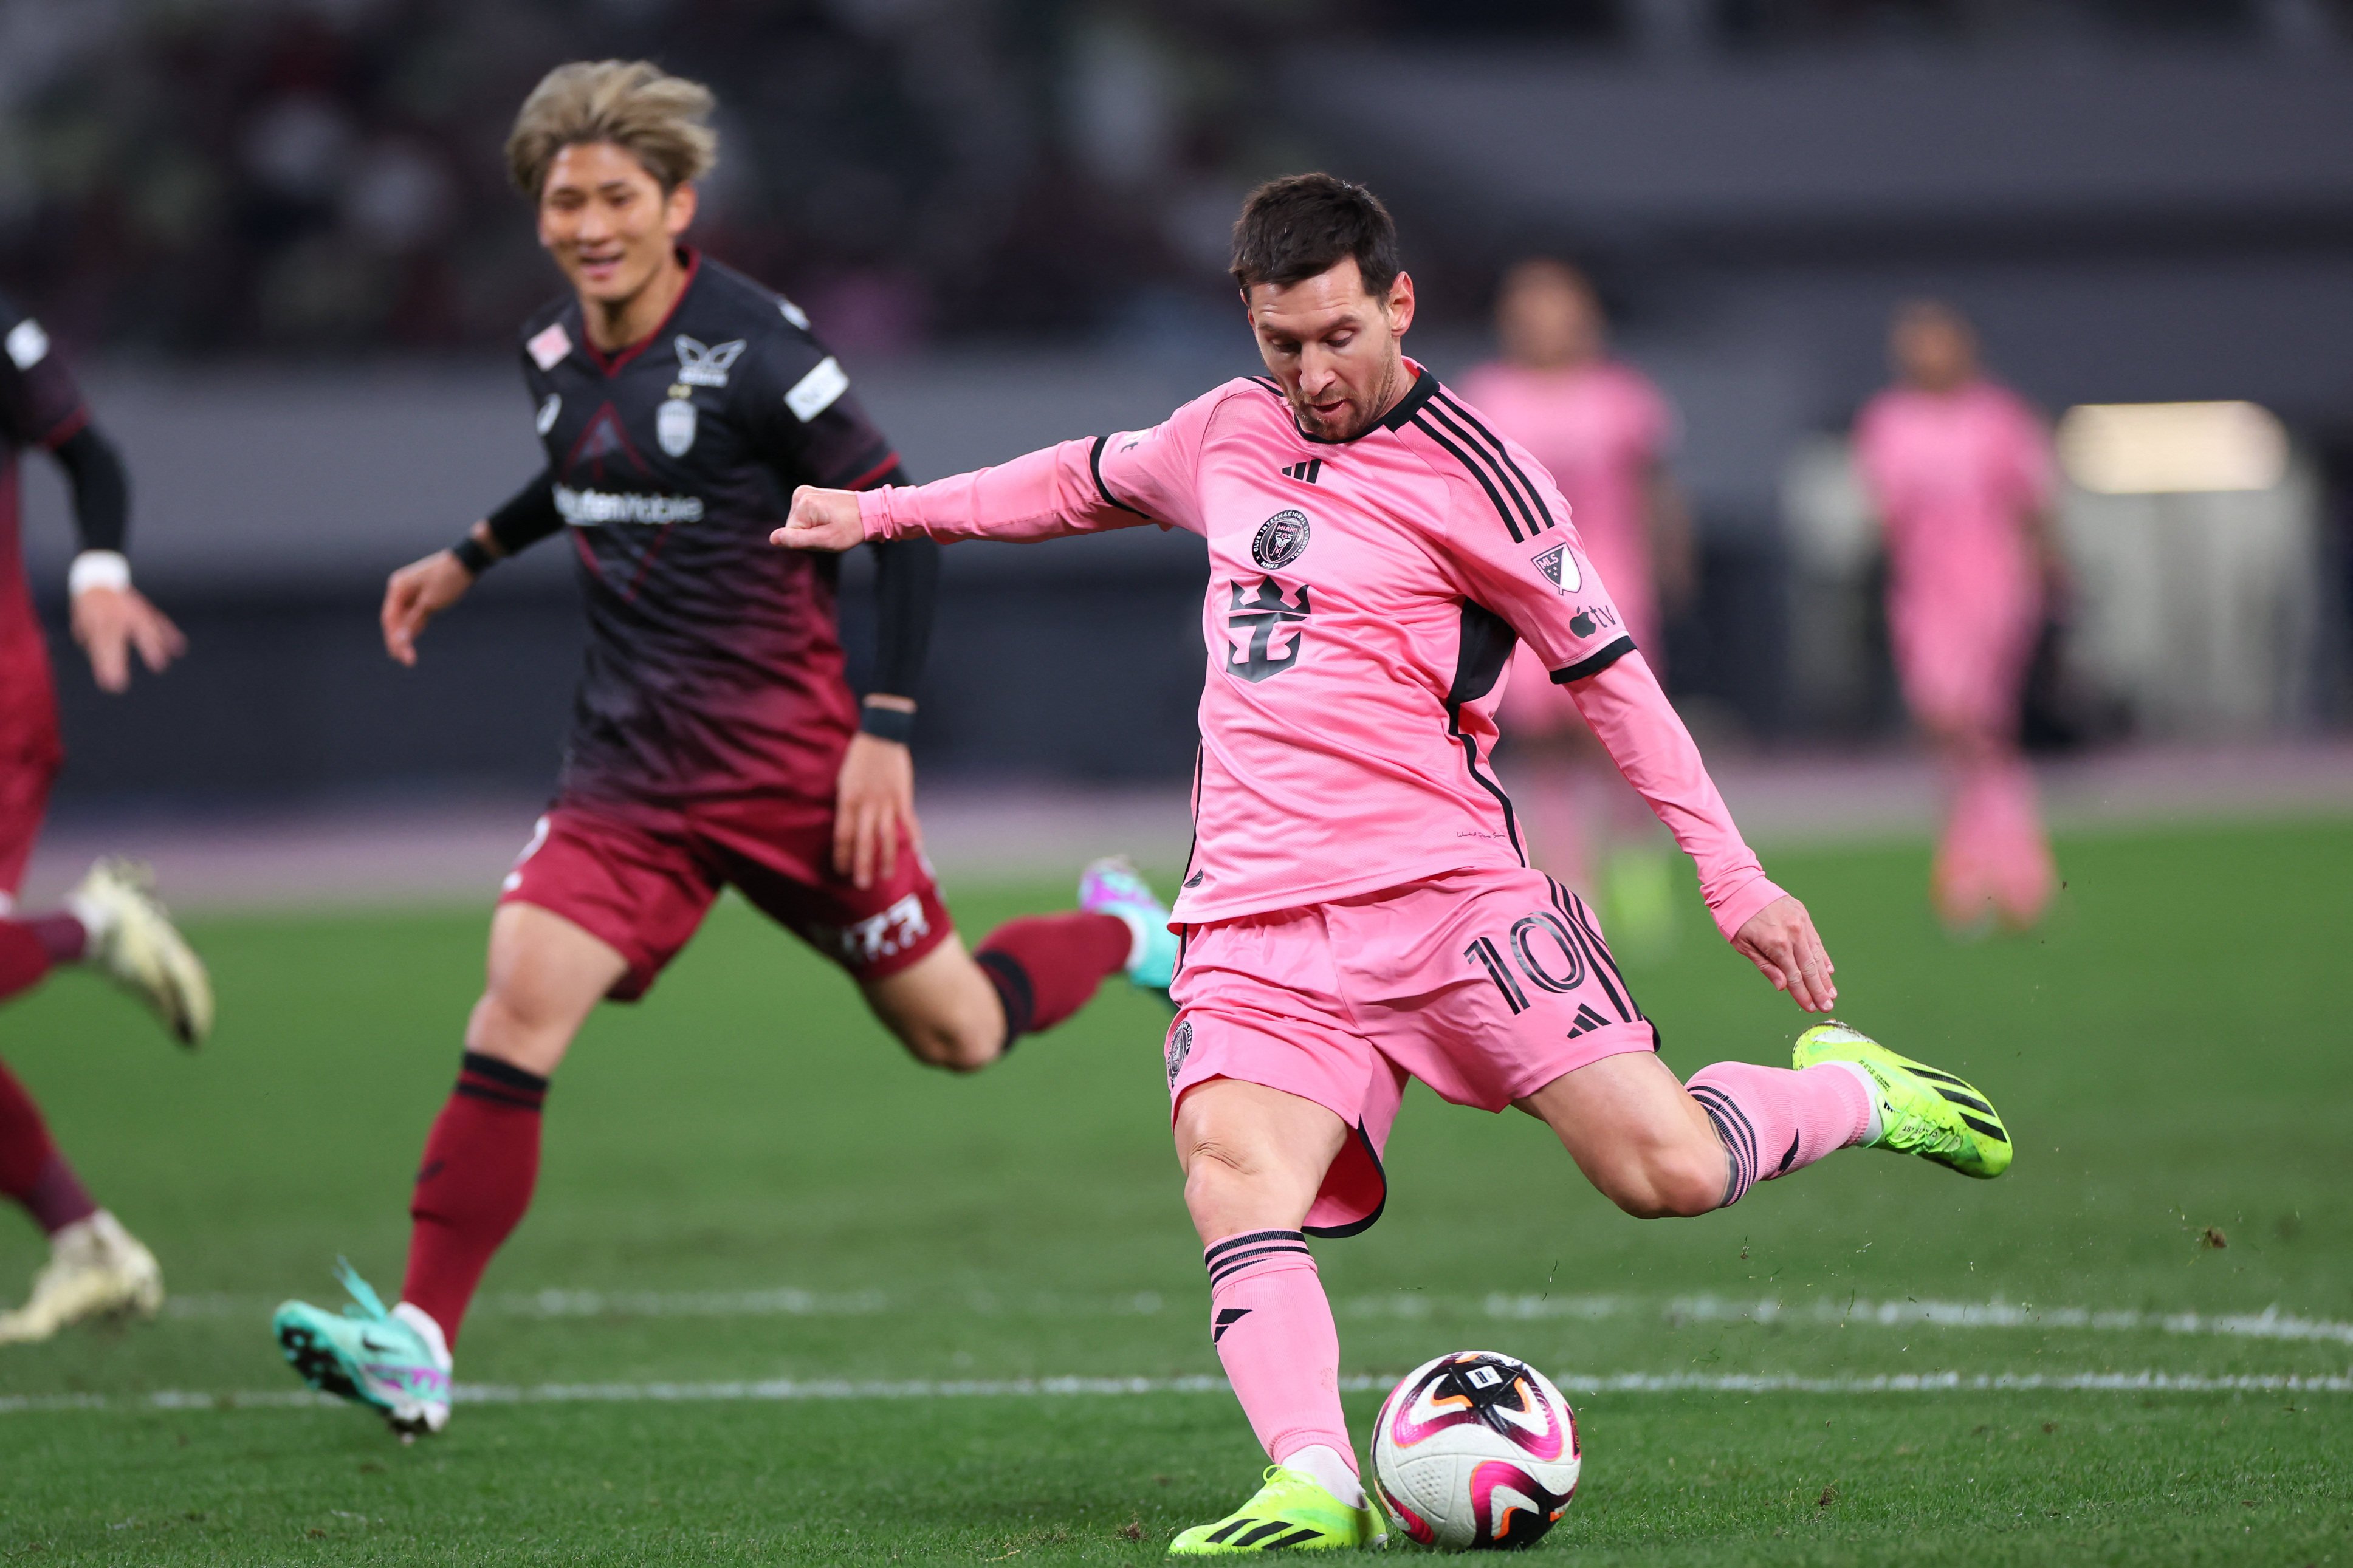 Lionel Messi shoots during the second half against Vissel Kobe on Wednesday. Photo: USA TODAY Sports via Reuters Con